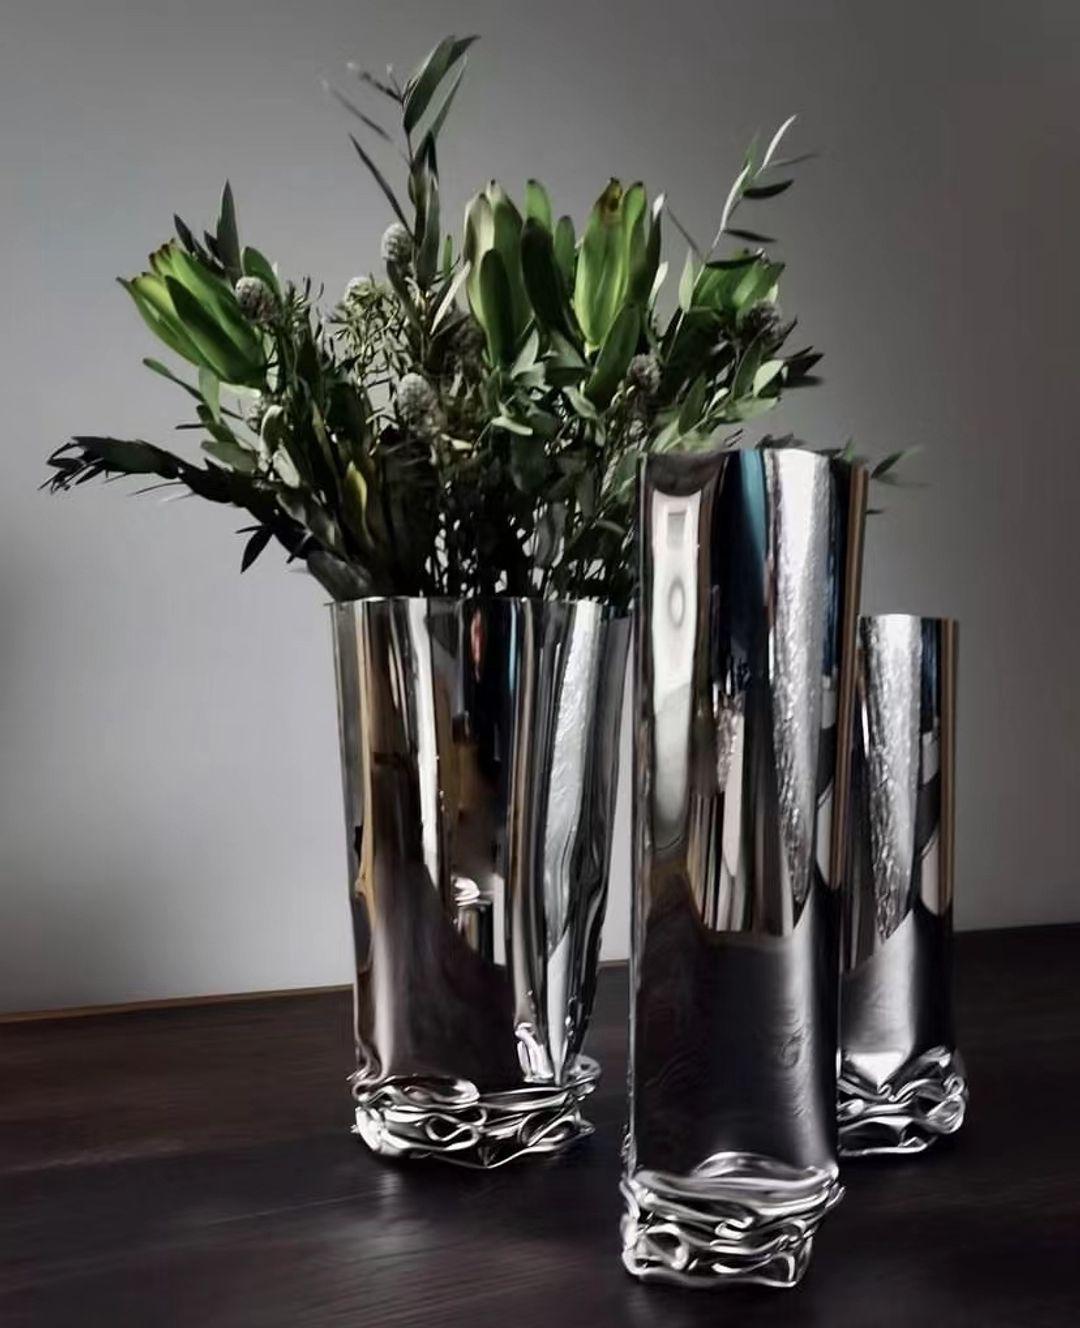 Oskar Zieta presents his latest works at the HE Concept Store and in the hotel’s passage. Modern, minimalist and often formally experimental vases will form part of the hotel’s elegant interiors.
 
Shiny steel reflecting the surrounding space,